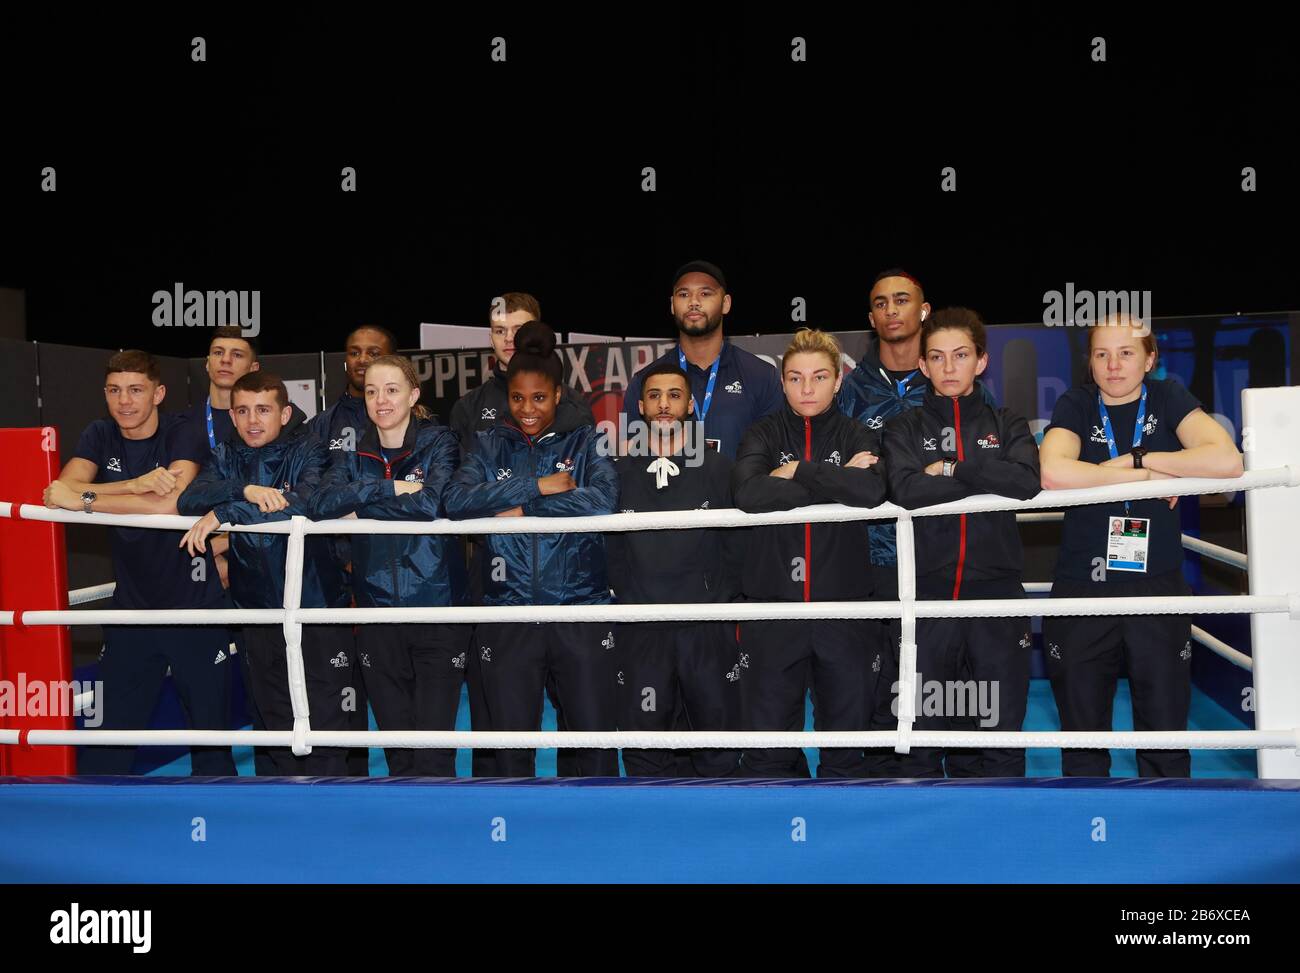 Great Britain's team of boxers hoping to go to the Tokyo Olympics during the media day at the Copper Box Arena, London. Stock Photo